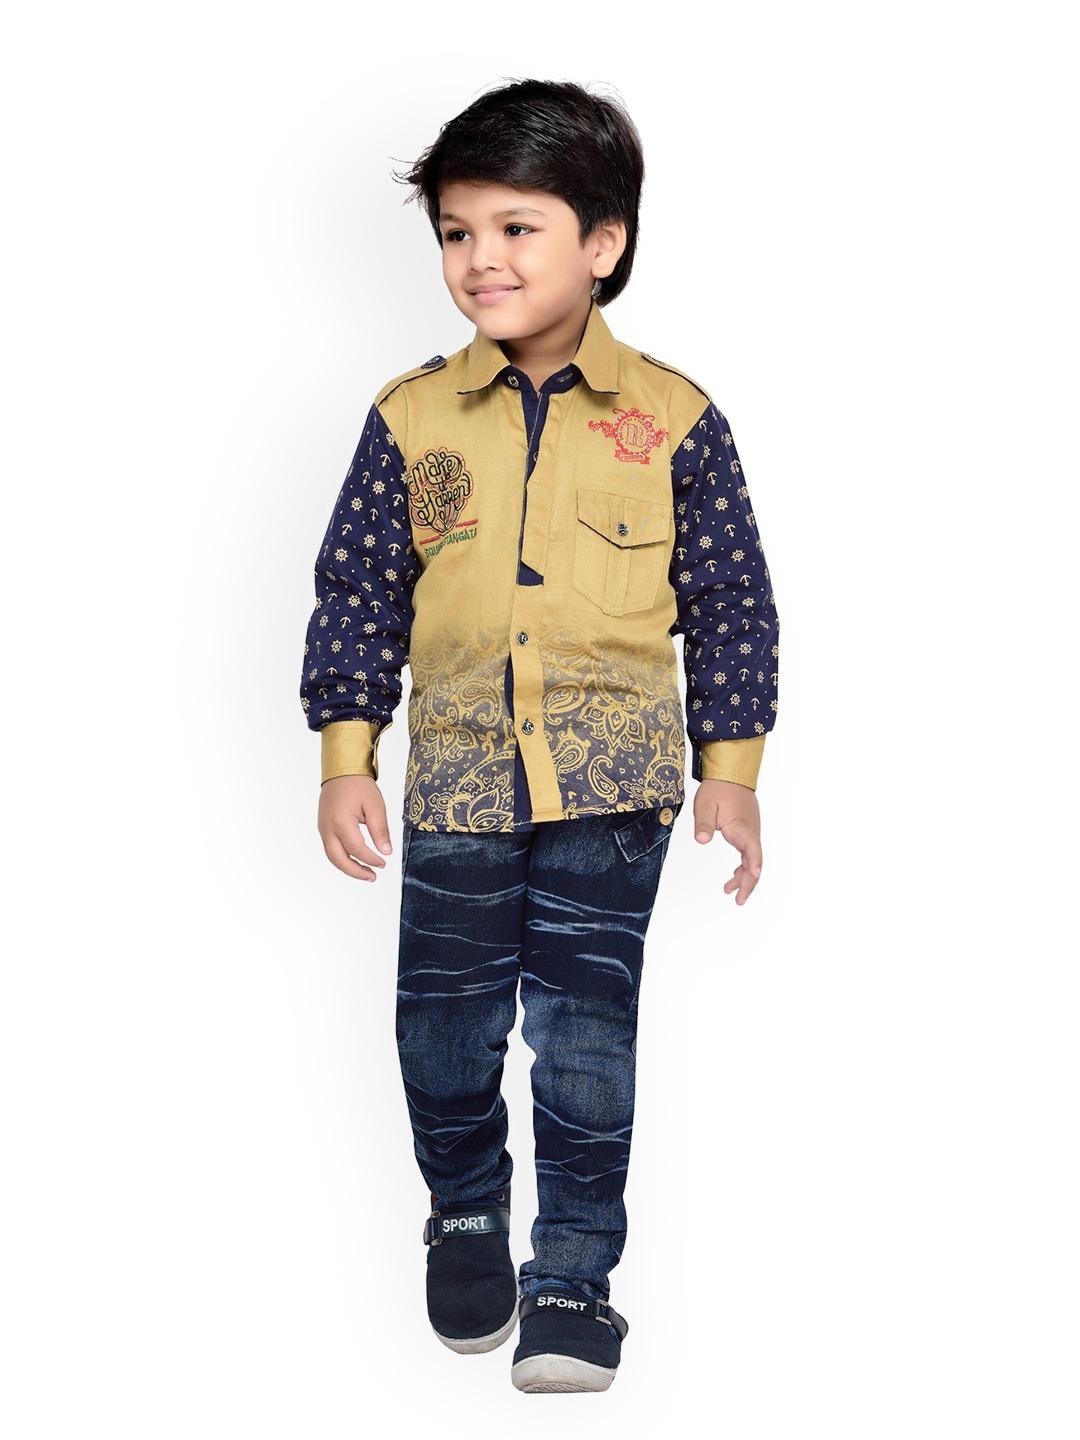 kidling-boys-brown-&-blue-printed-shirt-with-jeans